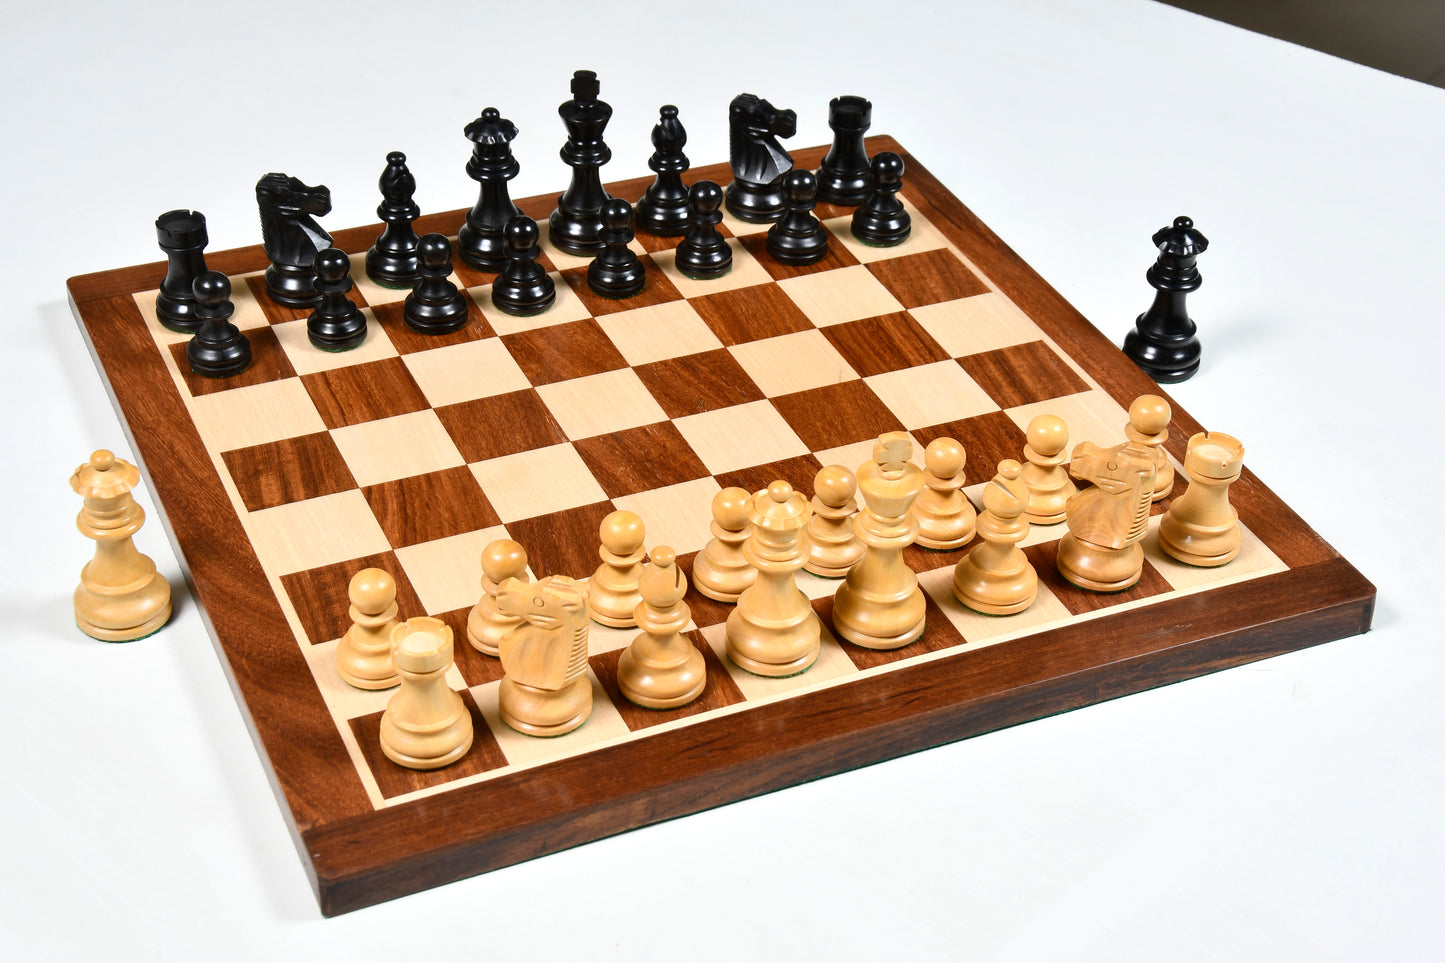 Reproduced French Lardy Exclusive Wooden Chess Pieces with Extra Queen - Handcrafted in Ebonized & Natural Boxwood 3" King